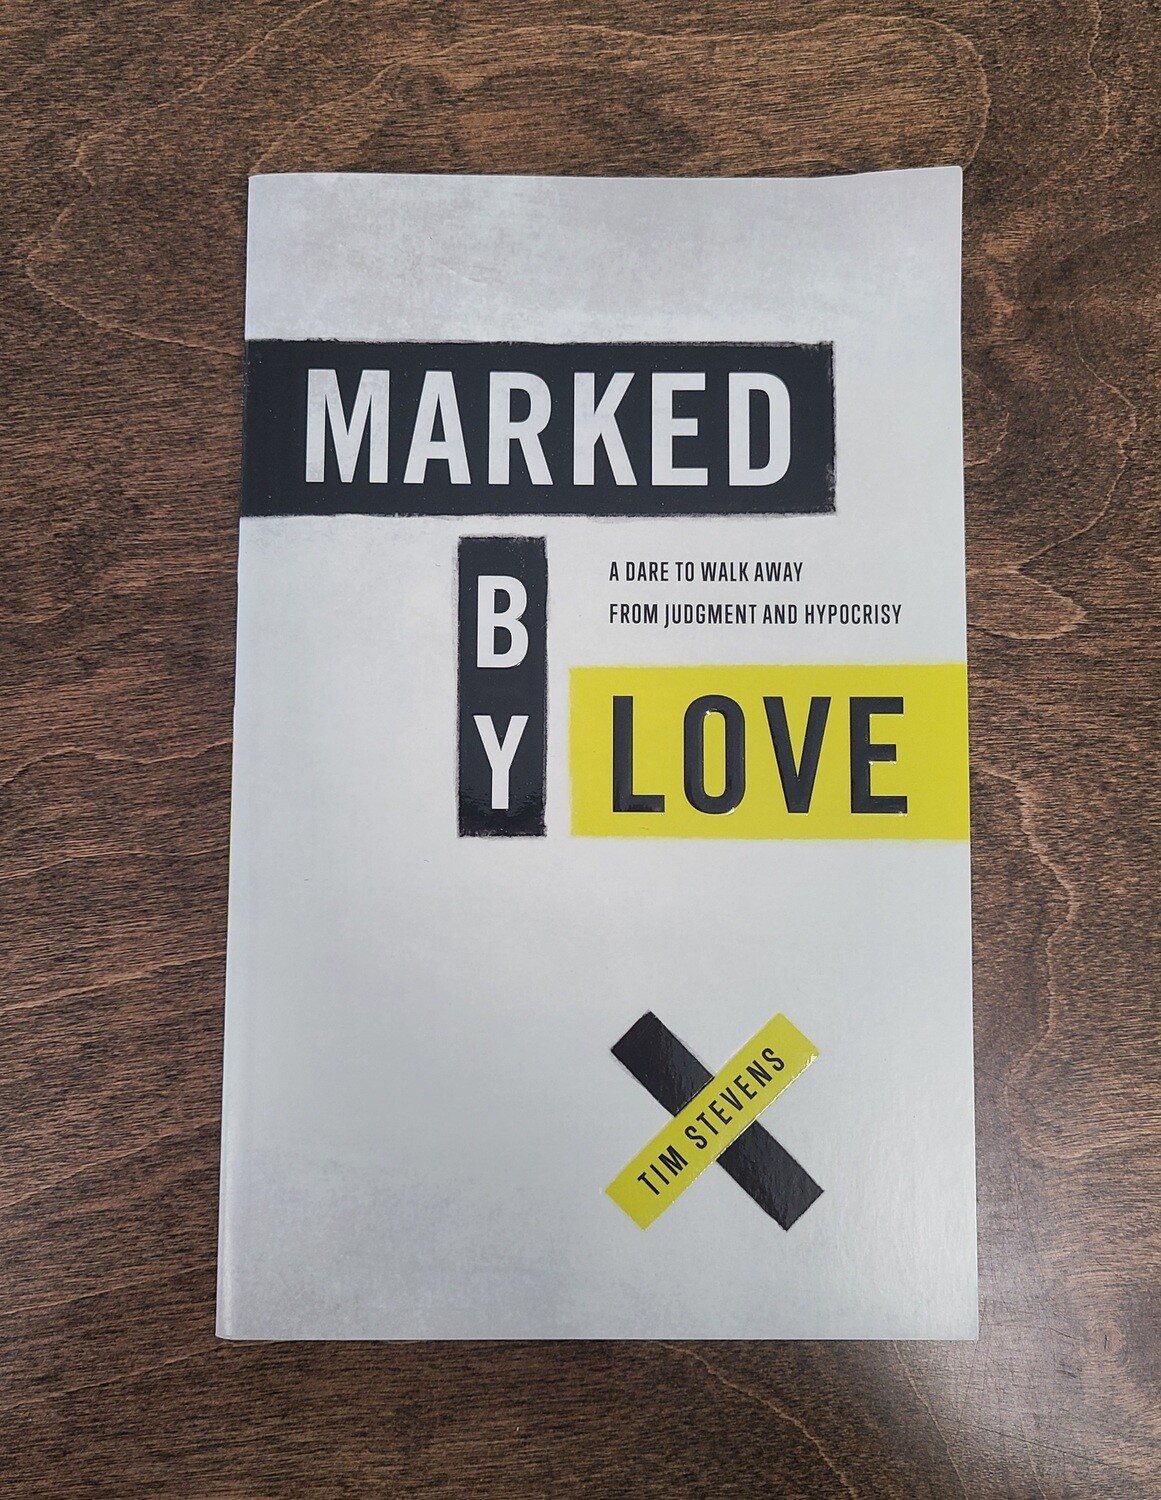 Marked by Love by Tim Stevens